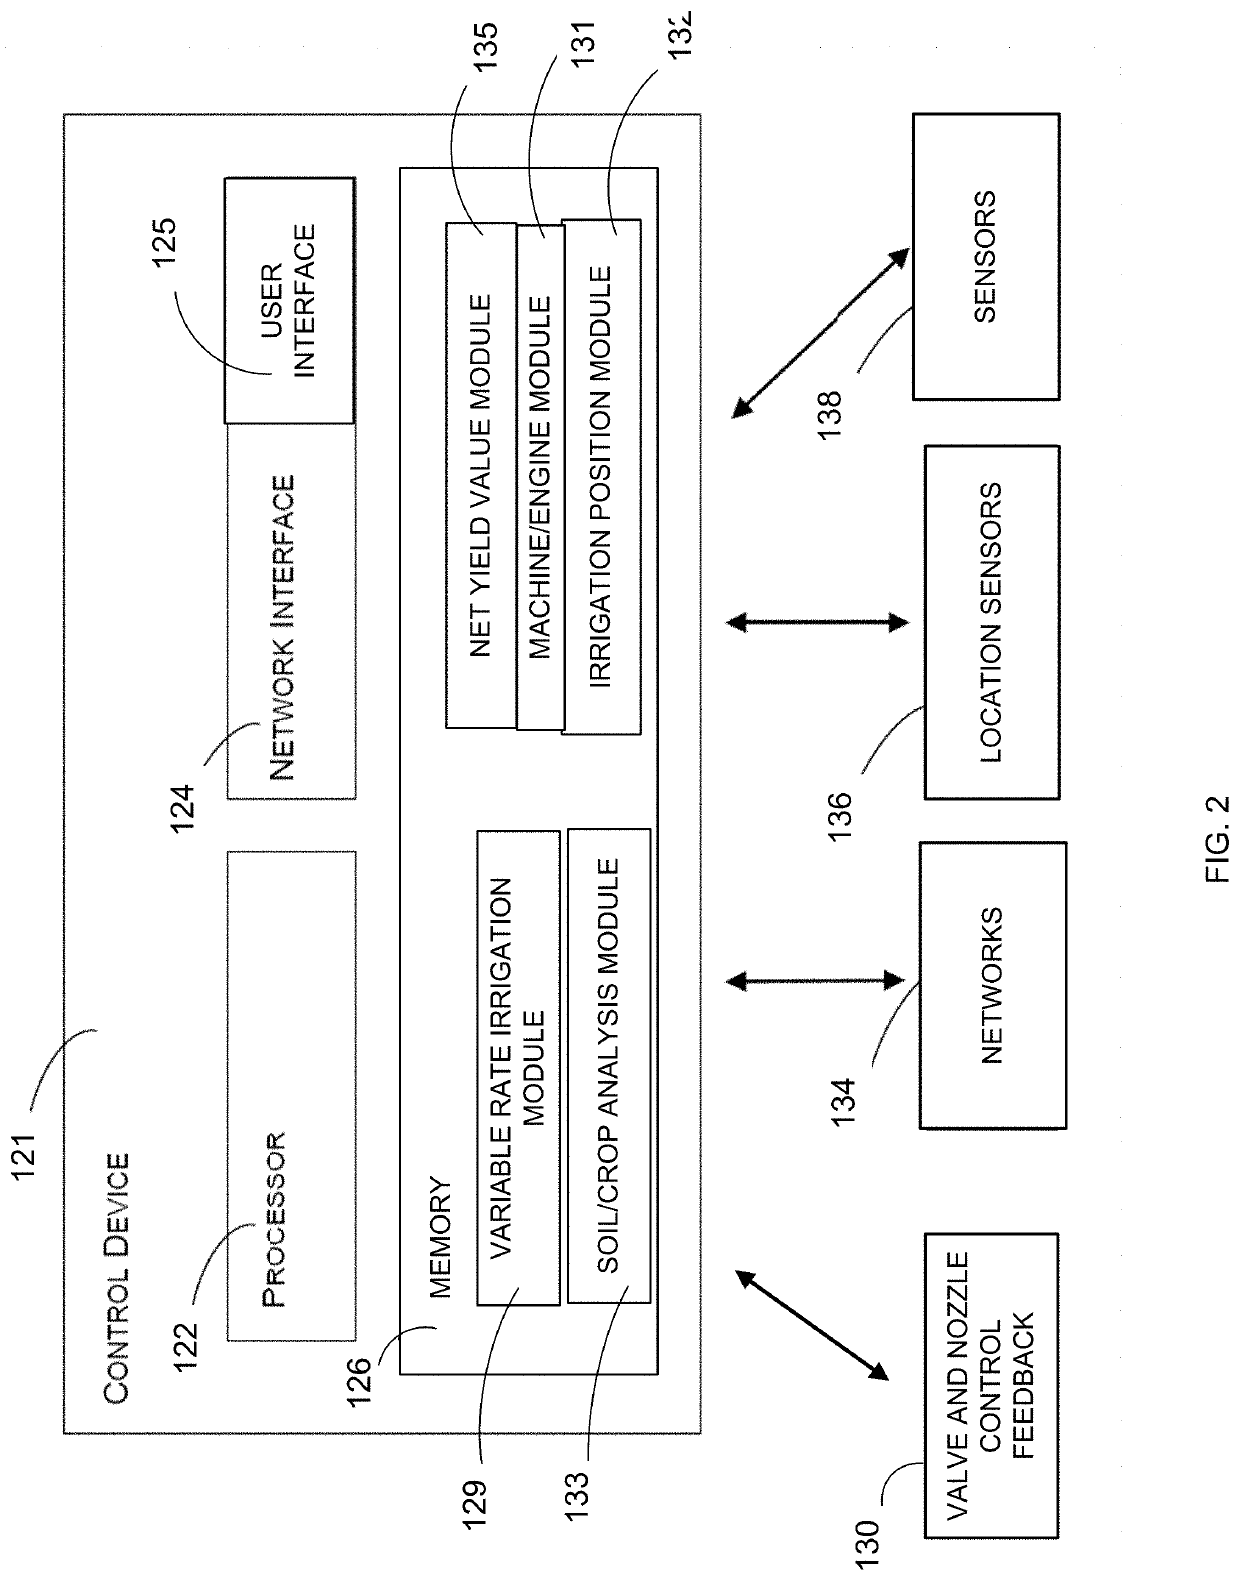 System, method and apparatus for integration of field, crop and irrigation equipment data for irrigation management